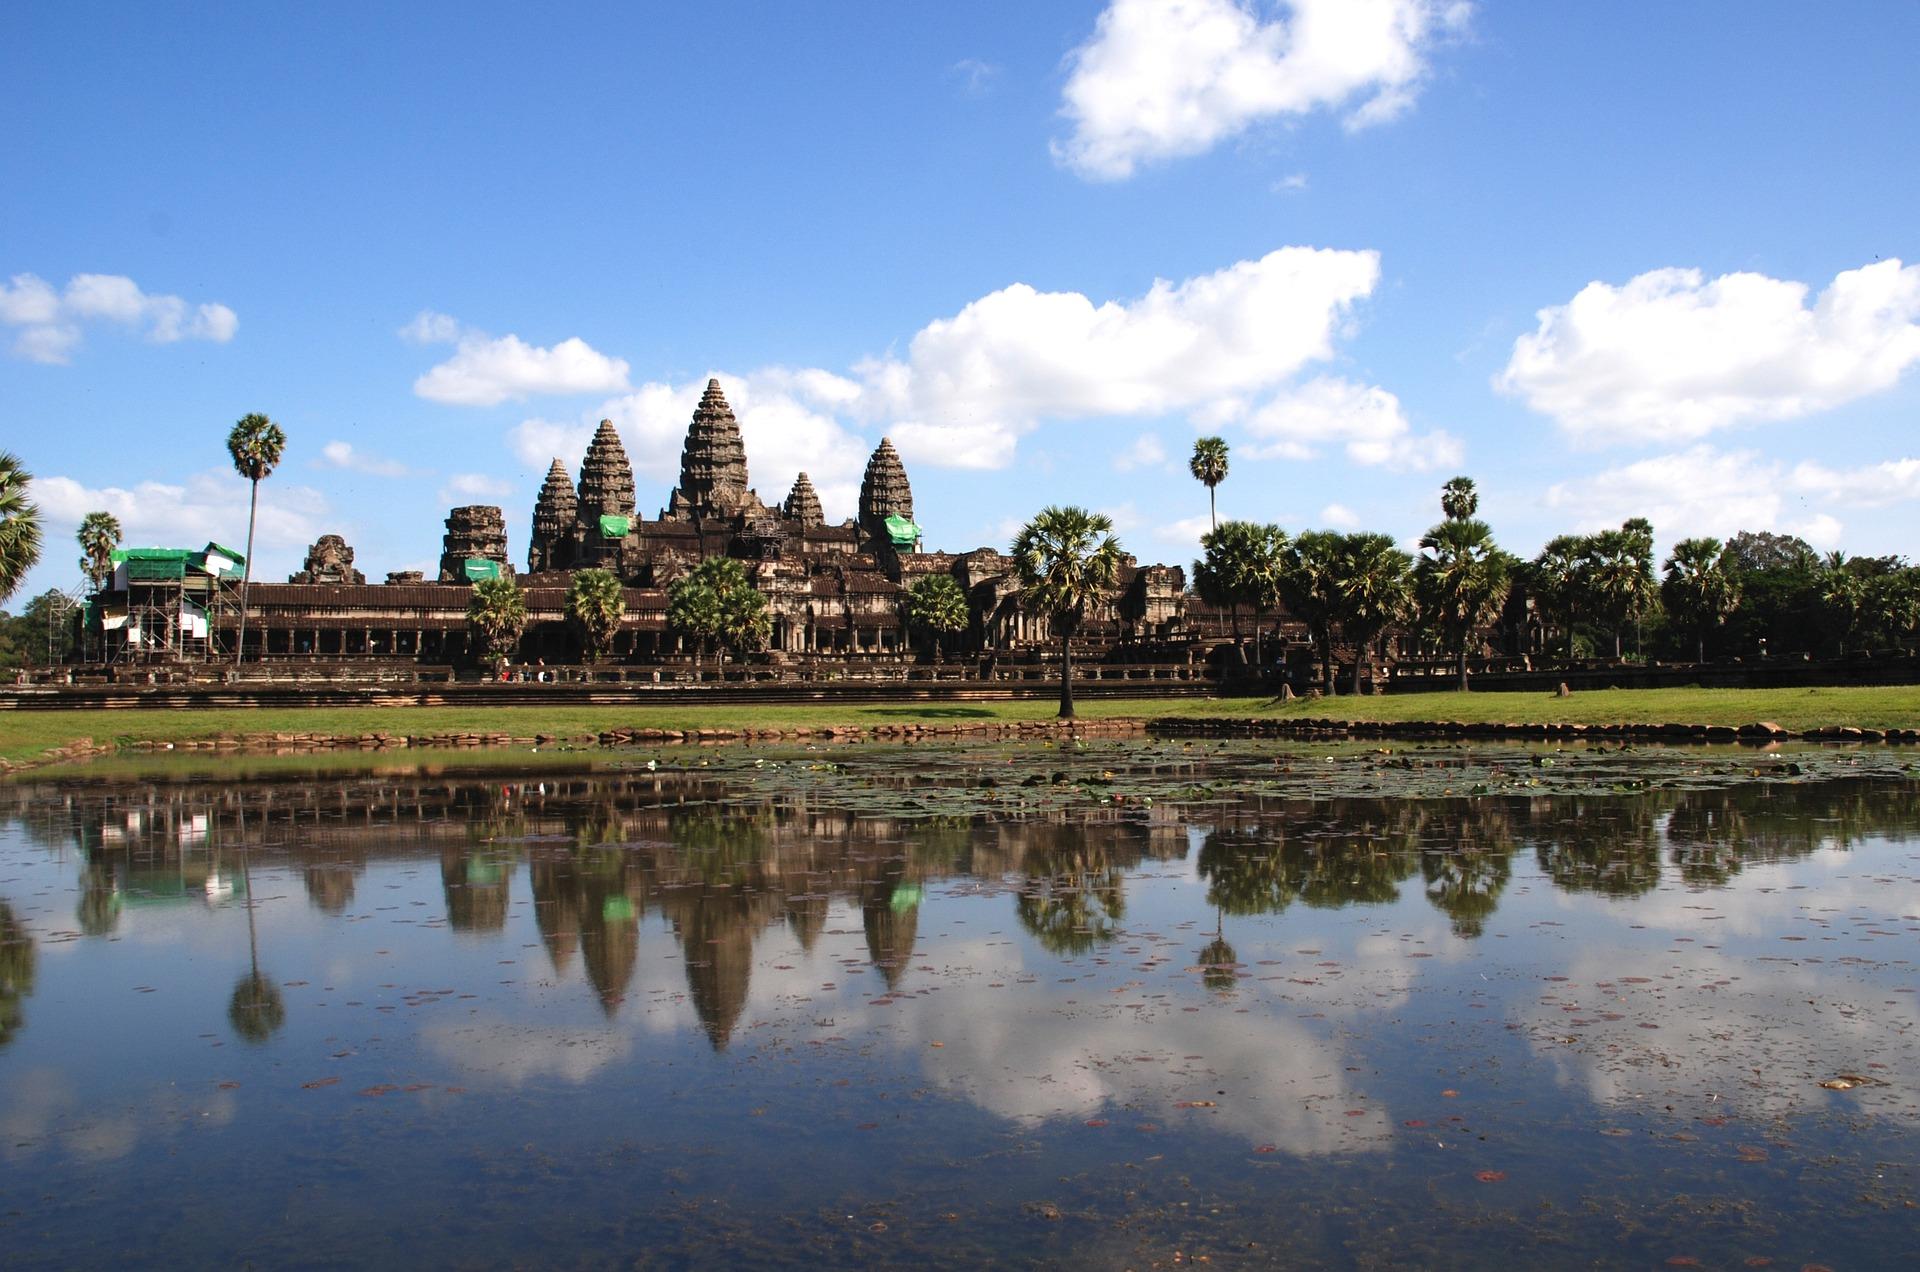 Angkor Wat in Cambodia with water.